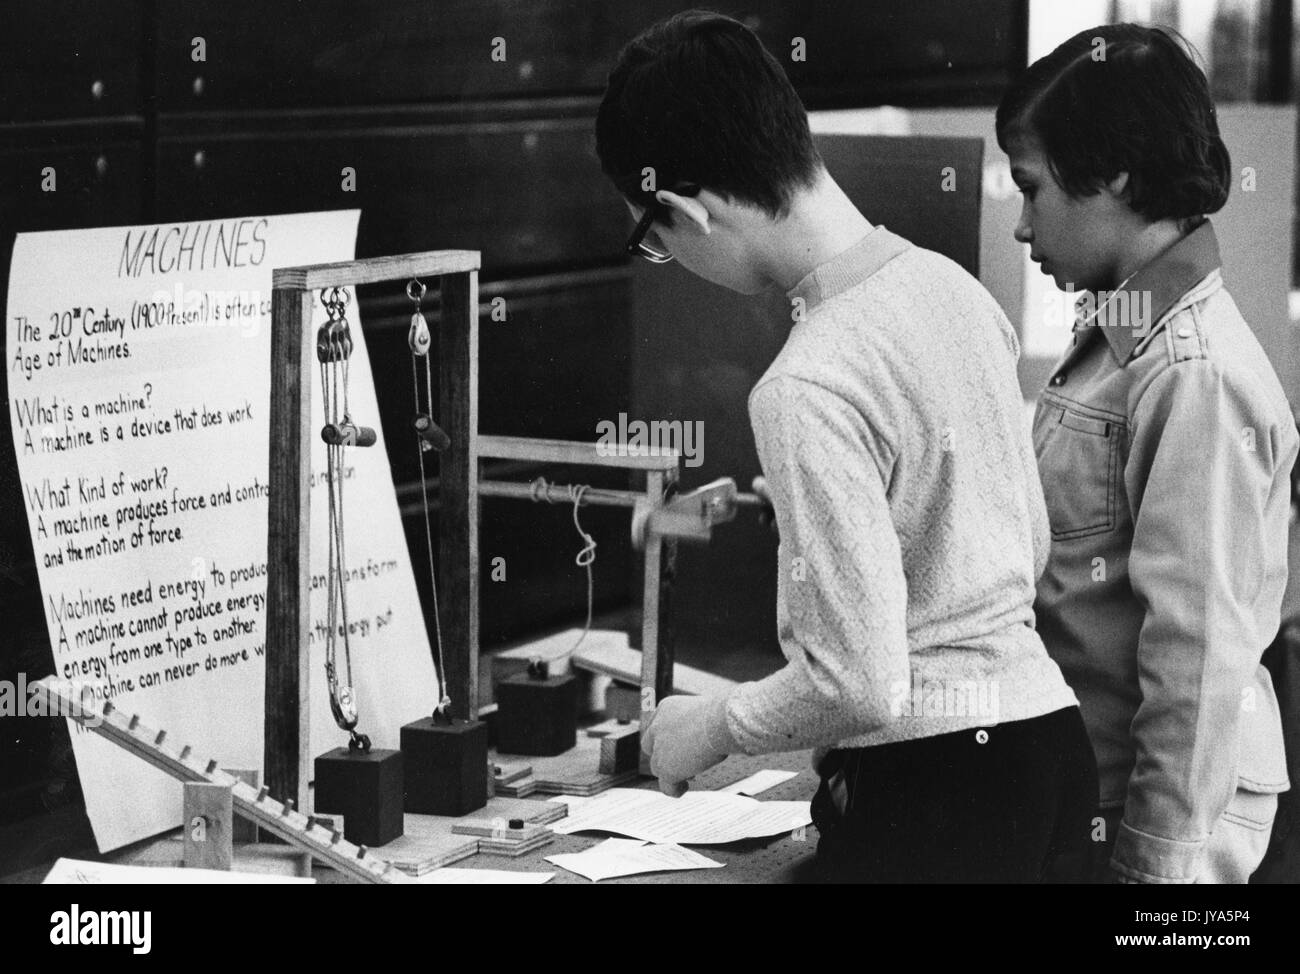 Two young male students investigate a project at a science fair about machines, interacting with a series of blocks and pulleys set up in front of a poster about machines in the 20th century. 1975. Stock Photo